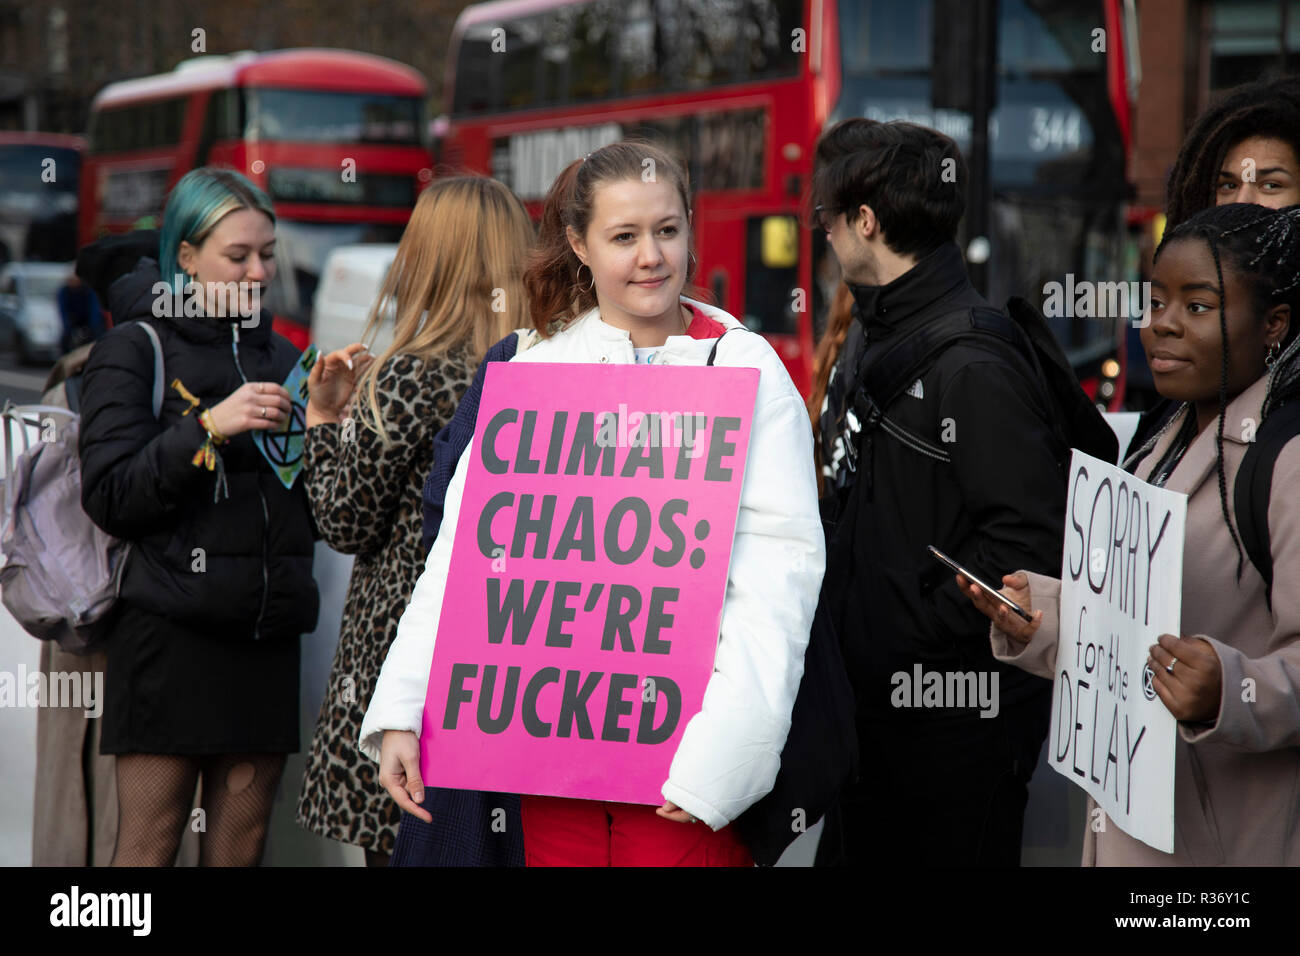 Climate change activists from the Extinction Rebellion group block roads in central London at Elephant and Castle in protest that the government is not doing enough to avoid catastrophic climate change and to demand the government take radical action to save the planet, on 21st November 2018 in London, England, United Kingdom. Extinction Rebellion is a climate change group started in 2018 and has gained a huge following of people committed to peaceful protests. Stock Photo